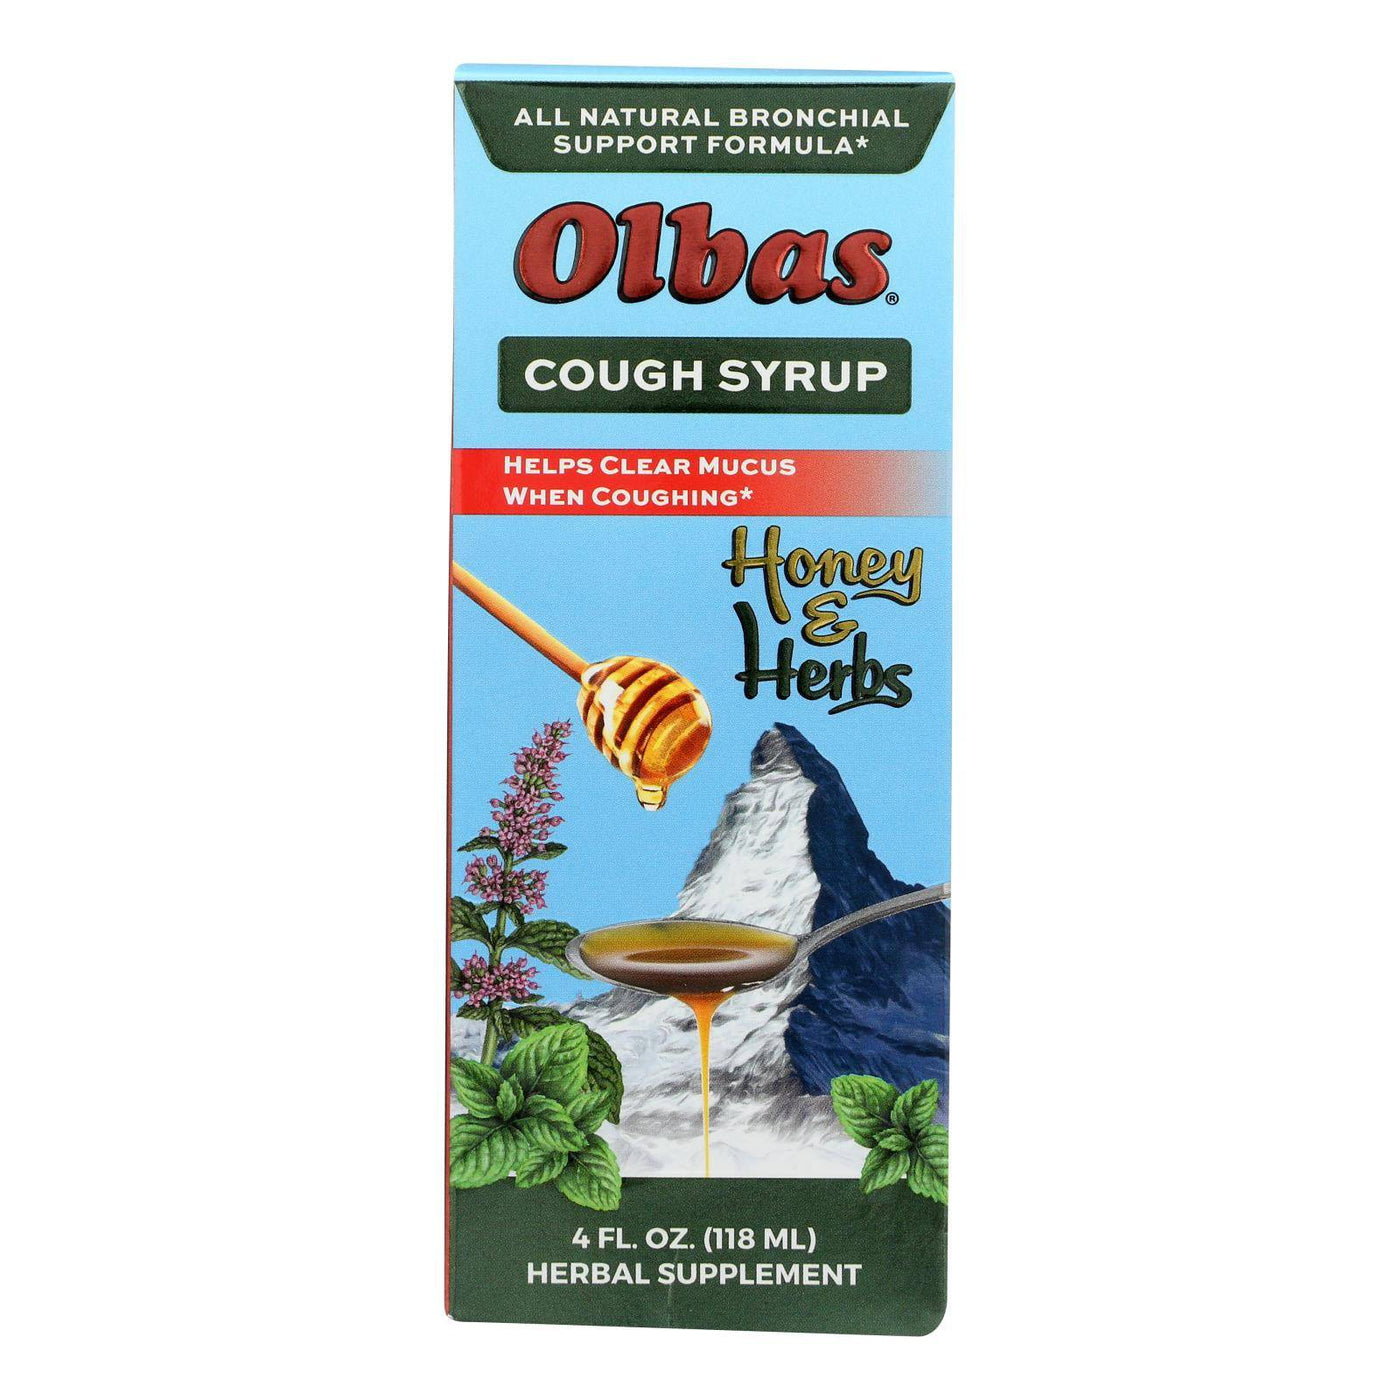 Buy Olbas - Cough Syrup - 4 Fl Oz  at OnlyNaturals.us